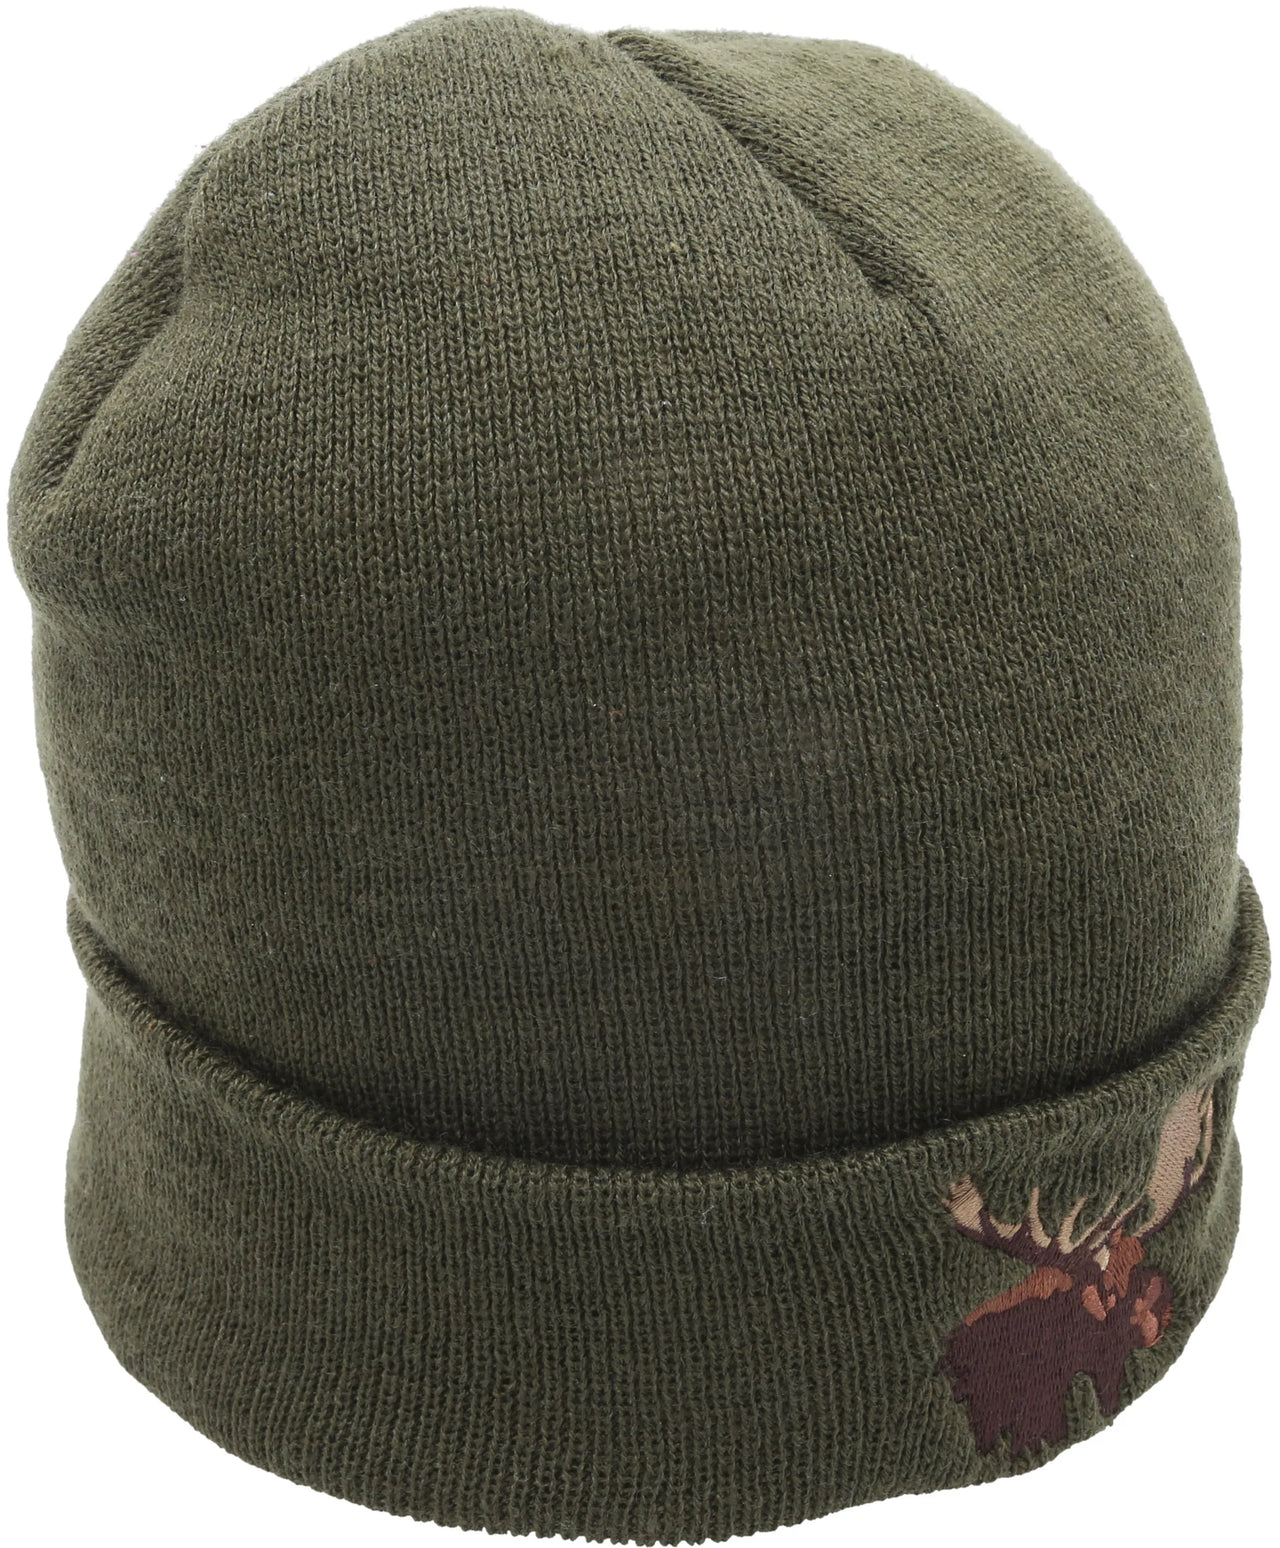 Adults' Moose Hunting Tuque